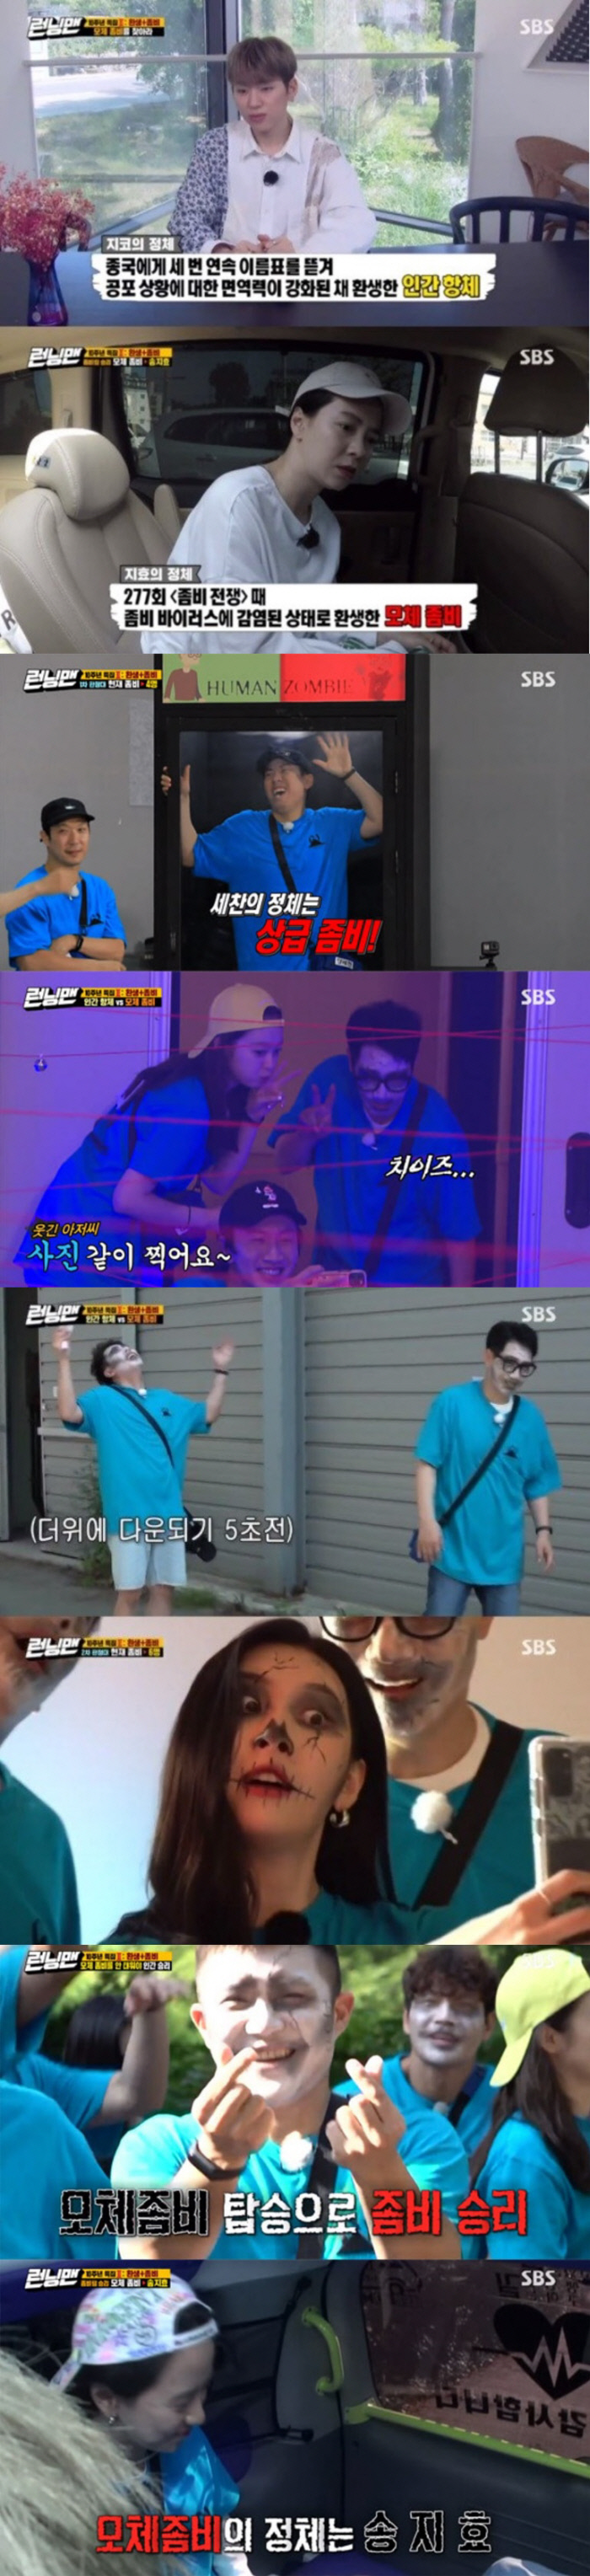 SBS Running Man showed 2020 Dead Again Special, the second part of Legend Race, to celebrate the tenth anniversary of the broadcast, and soared to 7.1% of the highest audience rating per minute.The race of SBS Running Man, which was broadcast on July 5 (Sun), is the 2020 version of Dead Again Race, which was a big topic with the composition and reversal of time and space in the 1930s and 2013 at the time of broadcasting in 2013.Singer Zico, Sunmi, comedian Jo Se-ho, and actor Lee Do-hyun joined as guests and added meaning.The members were divided into Zico team, Sunmi team, Seho team, and Dohyeon team, and they played against Zombie 2: The Dead are Among Us.In particular, Zombie 2: The Dead are Among Us had to be divided into the top-level Zombie 2: The Dead are Among Us and the bottom-level Zombie 2: The Dead are Among Us, and then found a decision ticket to set up the top-level Zombie 2: The Dead are Among Us on the judging panel.With comedian Ji Seok-jin being attacked by Zombie 2: The Dead are Among Us and becoming a junior Zombie 2: The Dead are Among Us, Yang Se-chan, who was first on the judging board, failed to find a vaccine and became a senior Zombie 2: The Dead are Among Us.Since then, the members have become senior, junior Zombie 2: The Dead are Among Us, narrowing the position of humans.Of these, Yoo Jae-Suk survived and found the Infection room by chance, and he got into an emergency car with Zico, who revealed that he was a human antibody, and Song Ji-hyo, who ate the vaccine.However, Song Ji-hyo was found to be the mother Zombie 2: The Dead are Among Us, and human beings were defeated.The scene had the highest audience rating of 7.1% per minute, taking the best one minute.Running Man, which will be broadcast on Sunday, July 12, is decorated with tenth anniversary SEK Live broadcast with viewers.